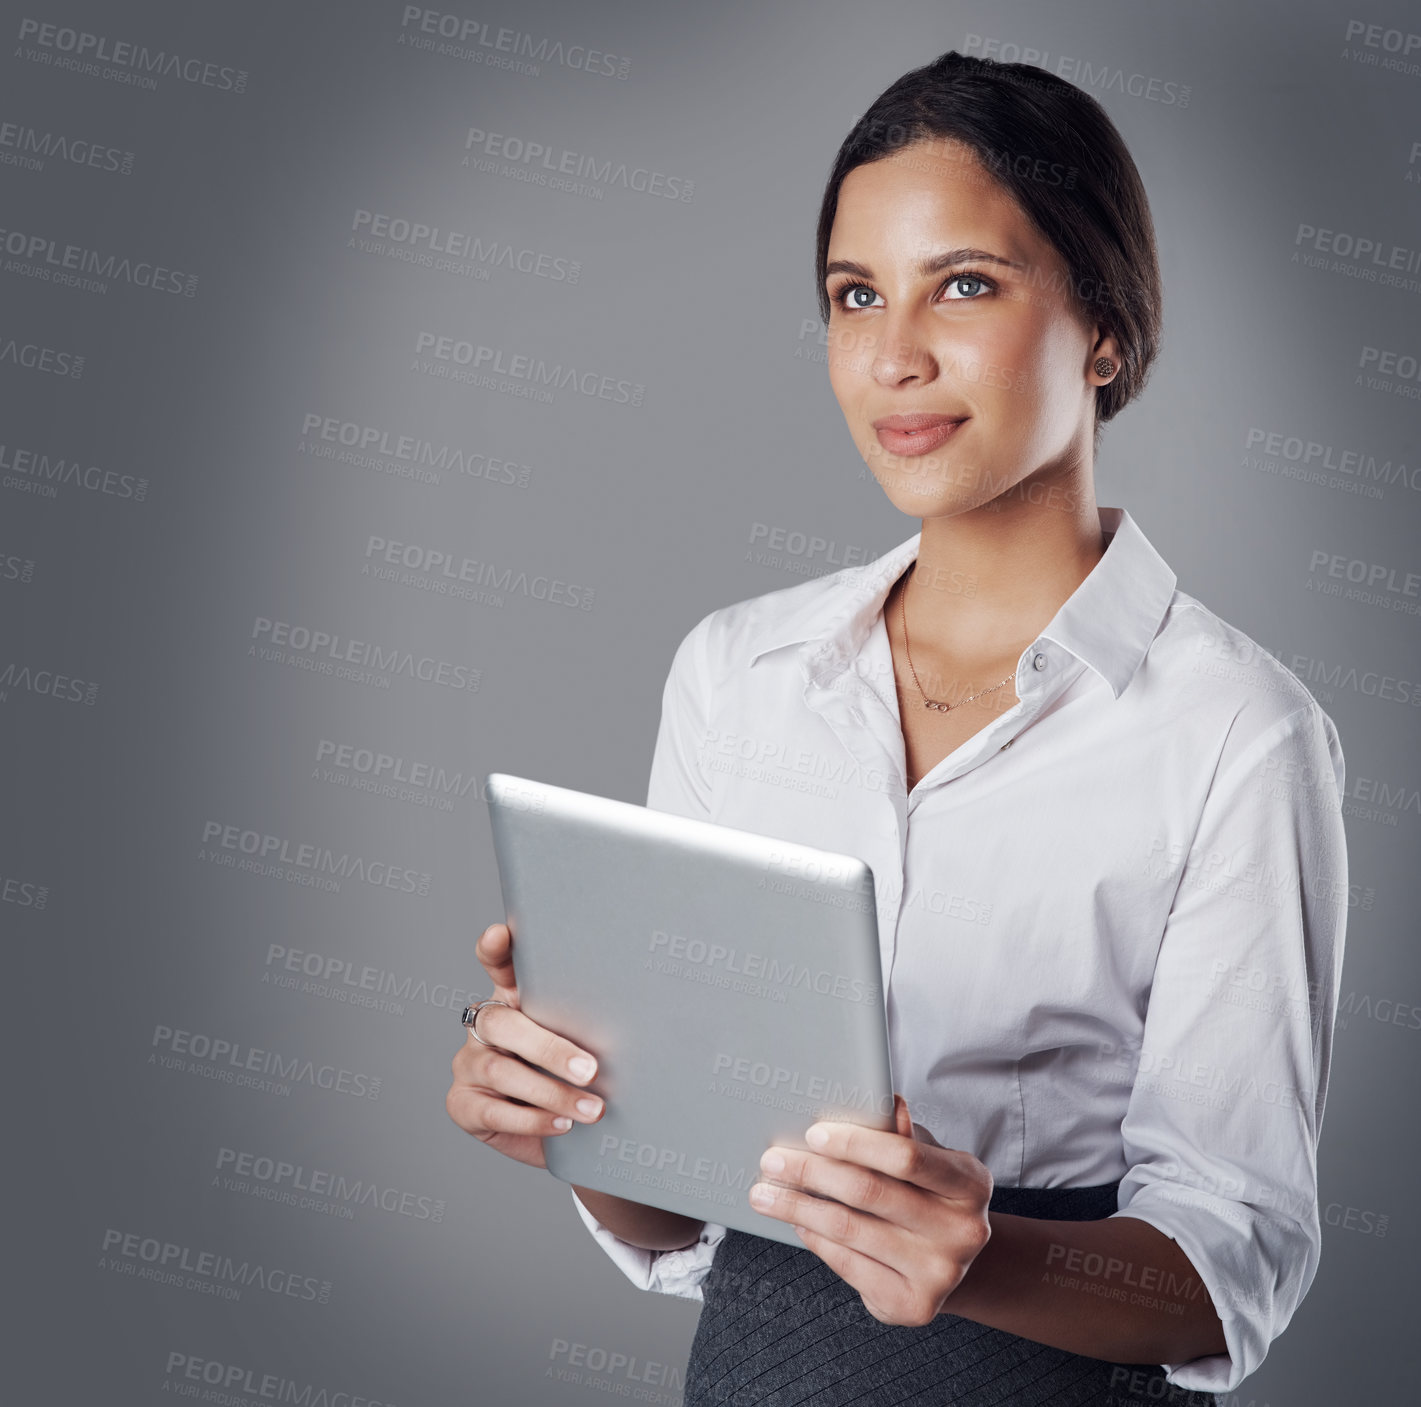 Buy stock photo Studio shot of a young businesswoman using a digital tablet against a gray background